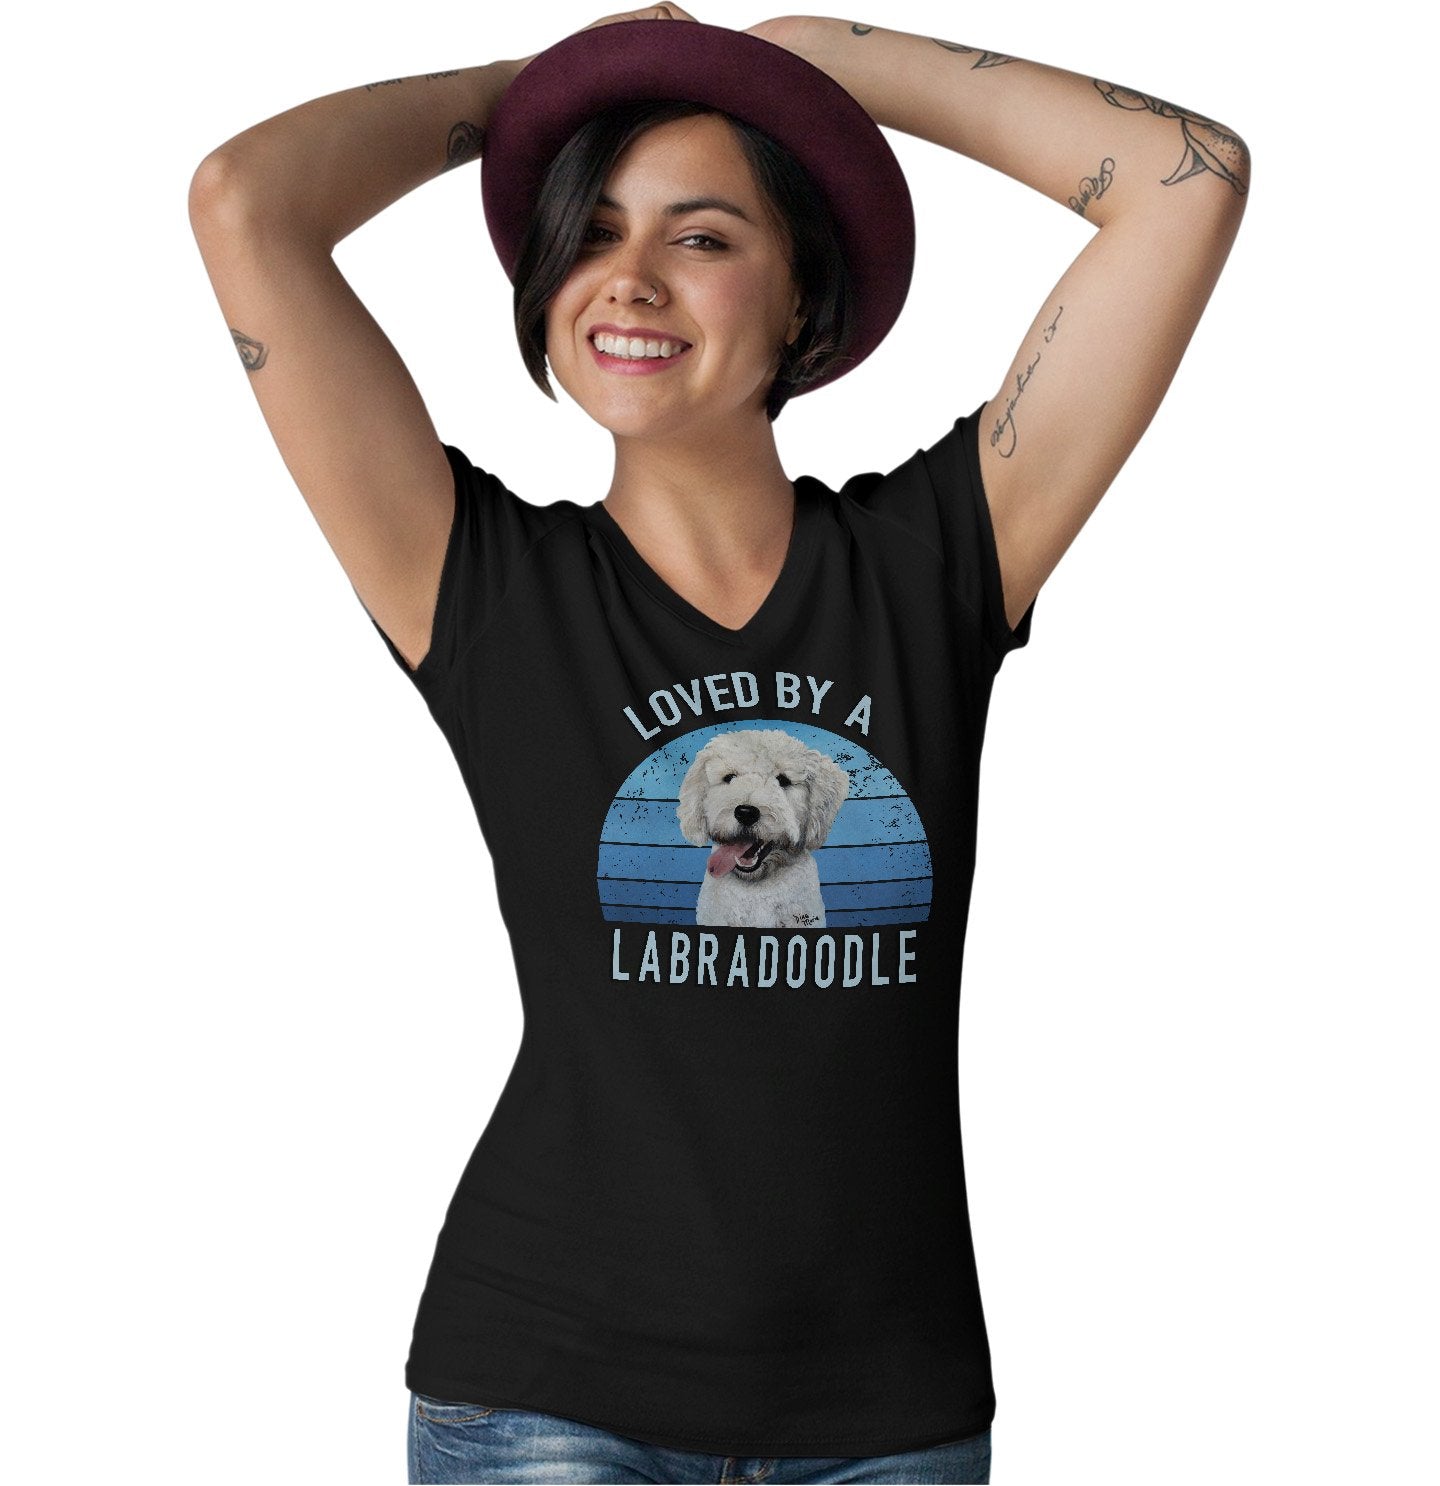 Loved By A Labradoodle - Women's V-Neck T-Shirt